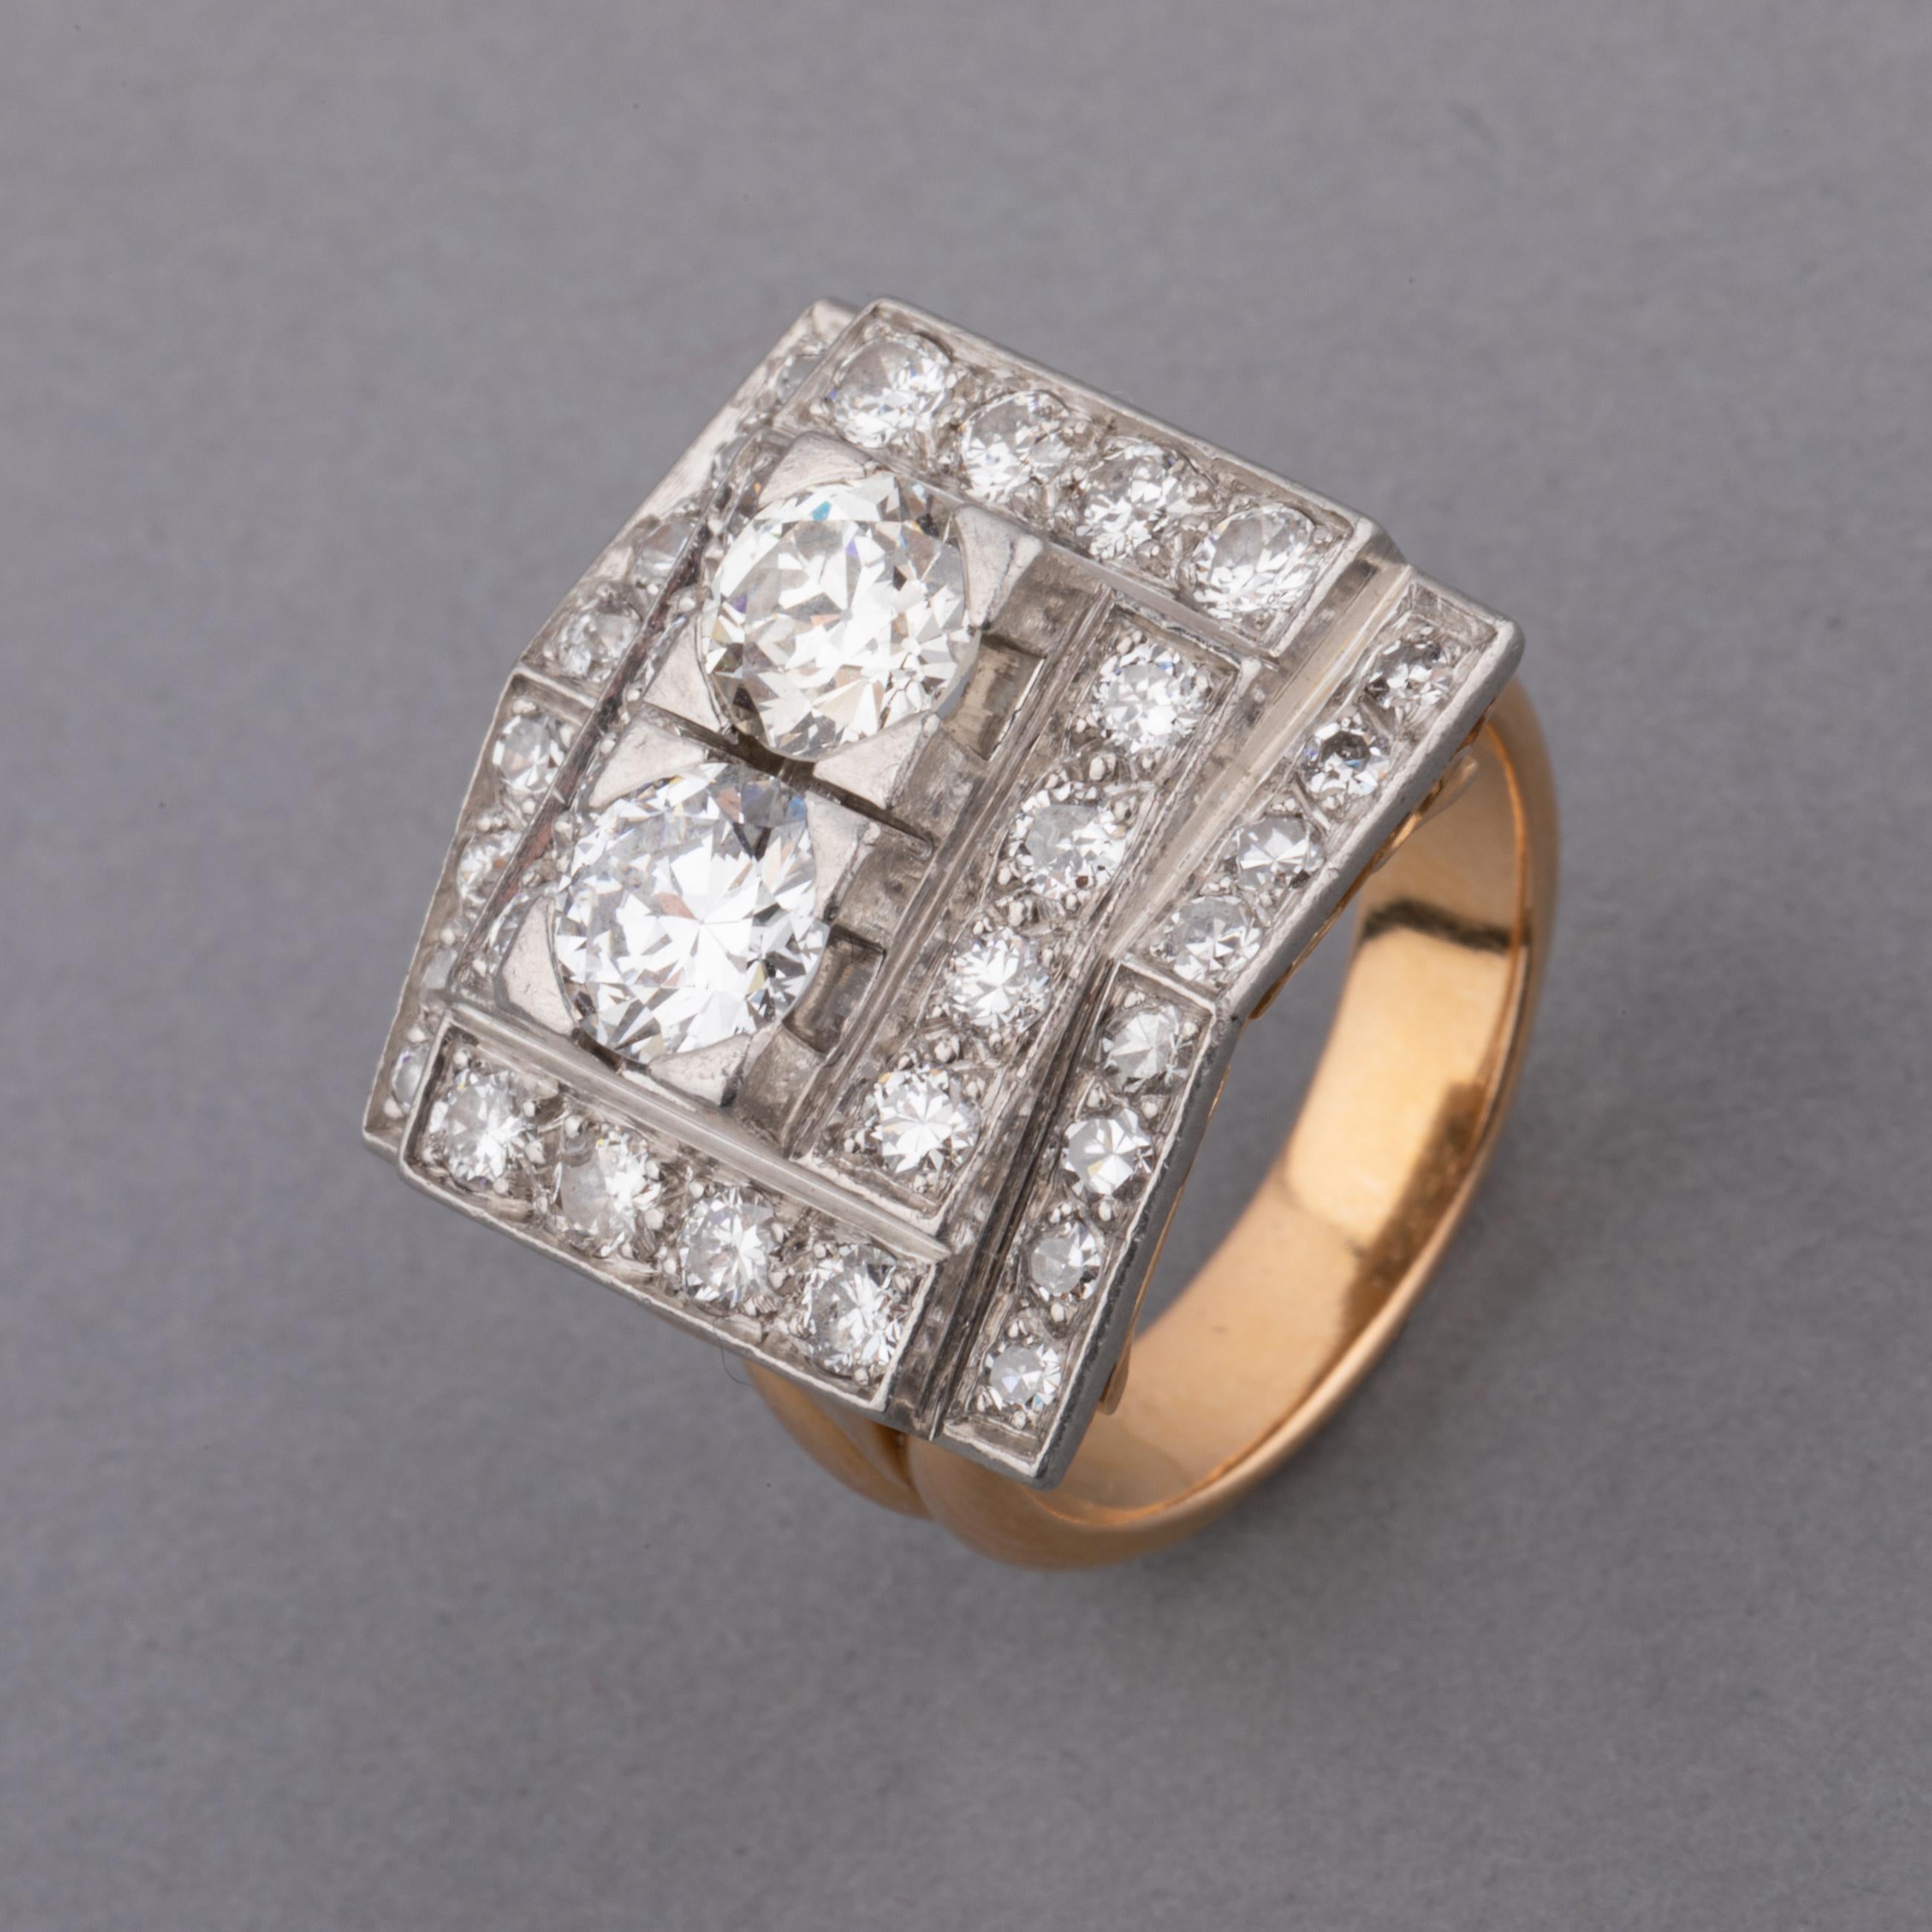 A very lovely retro ring, made in France circa 1940.
Made in platinum and 18k gold. The two principal round cut diamonds weights 0.70 carats each. 3 carats total.
French Hallmarks for platinum and gold.
The dimension of front part is 18*17mm.
Ring